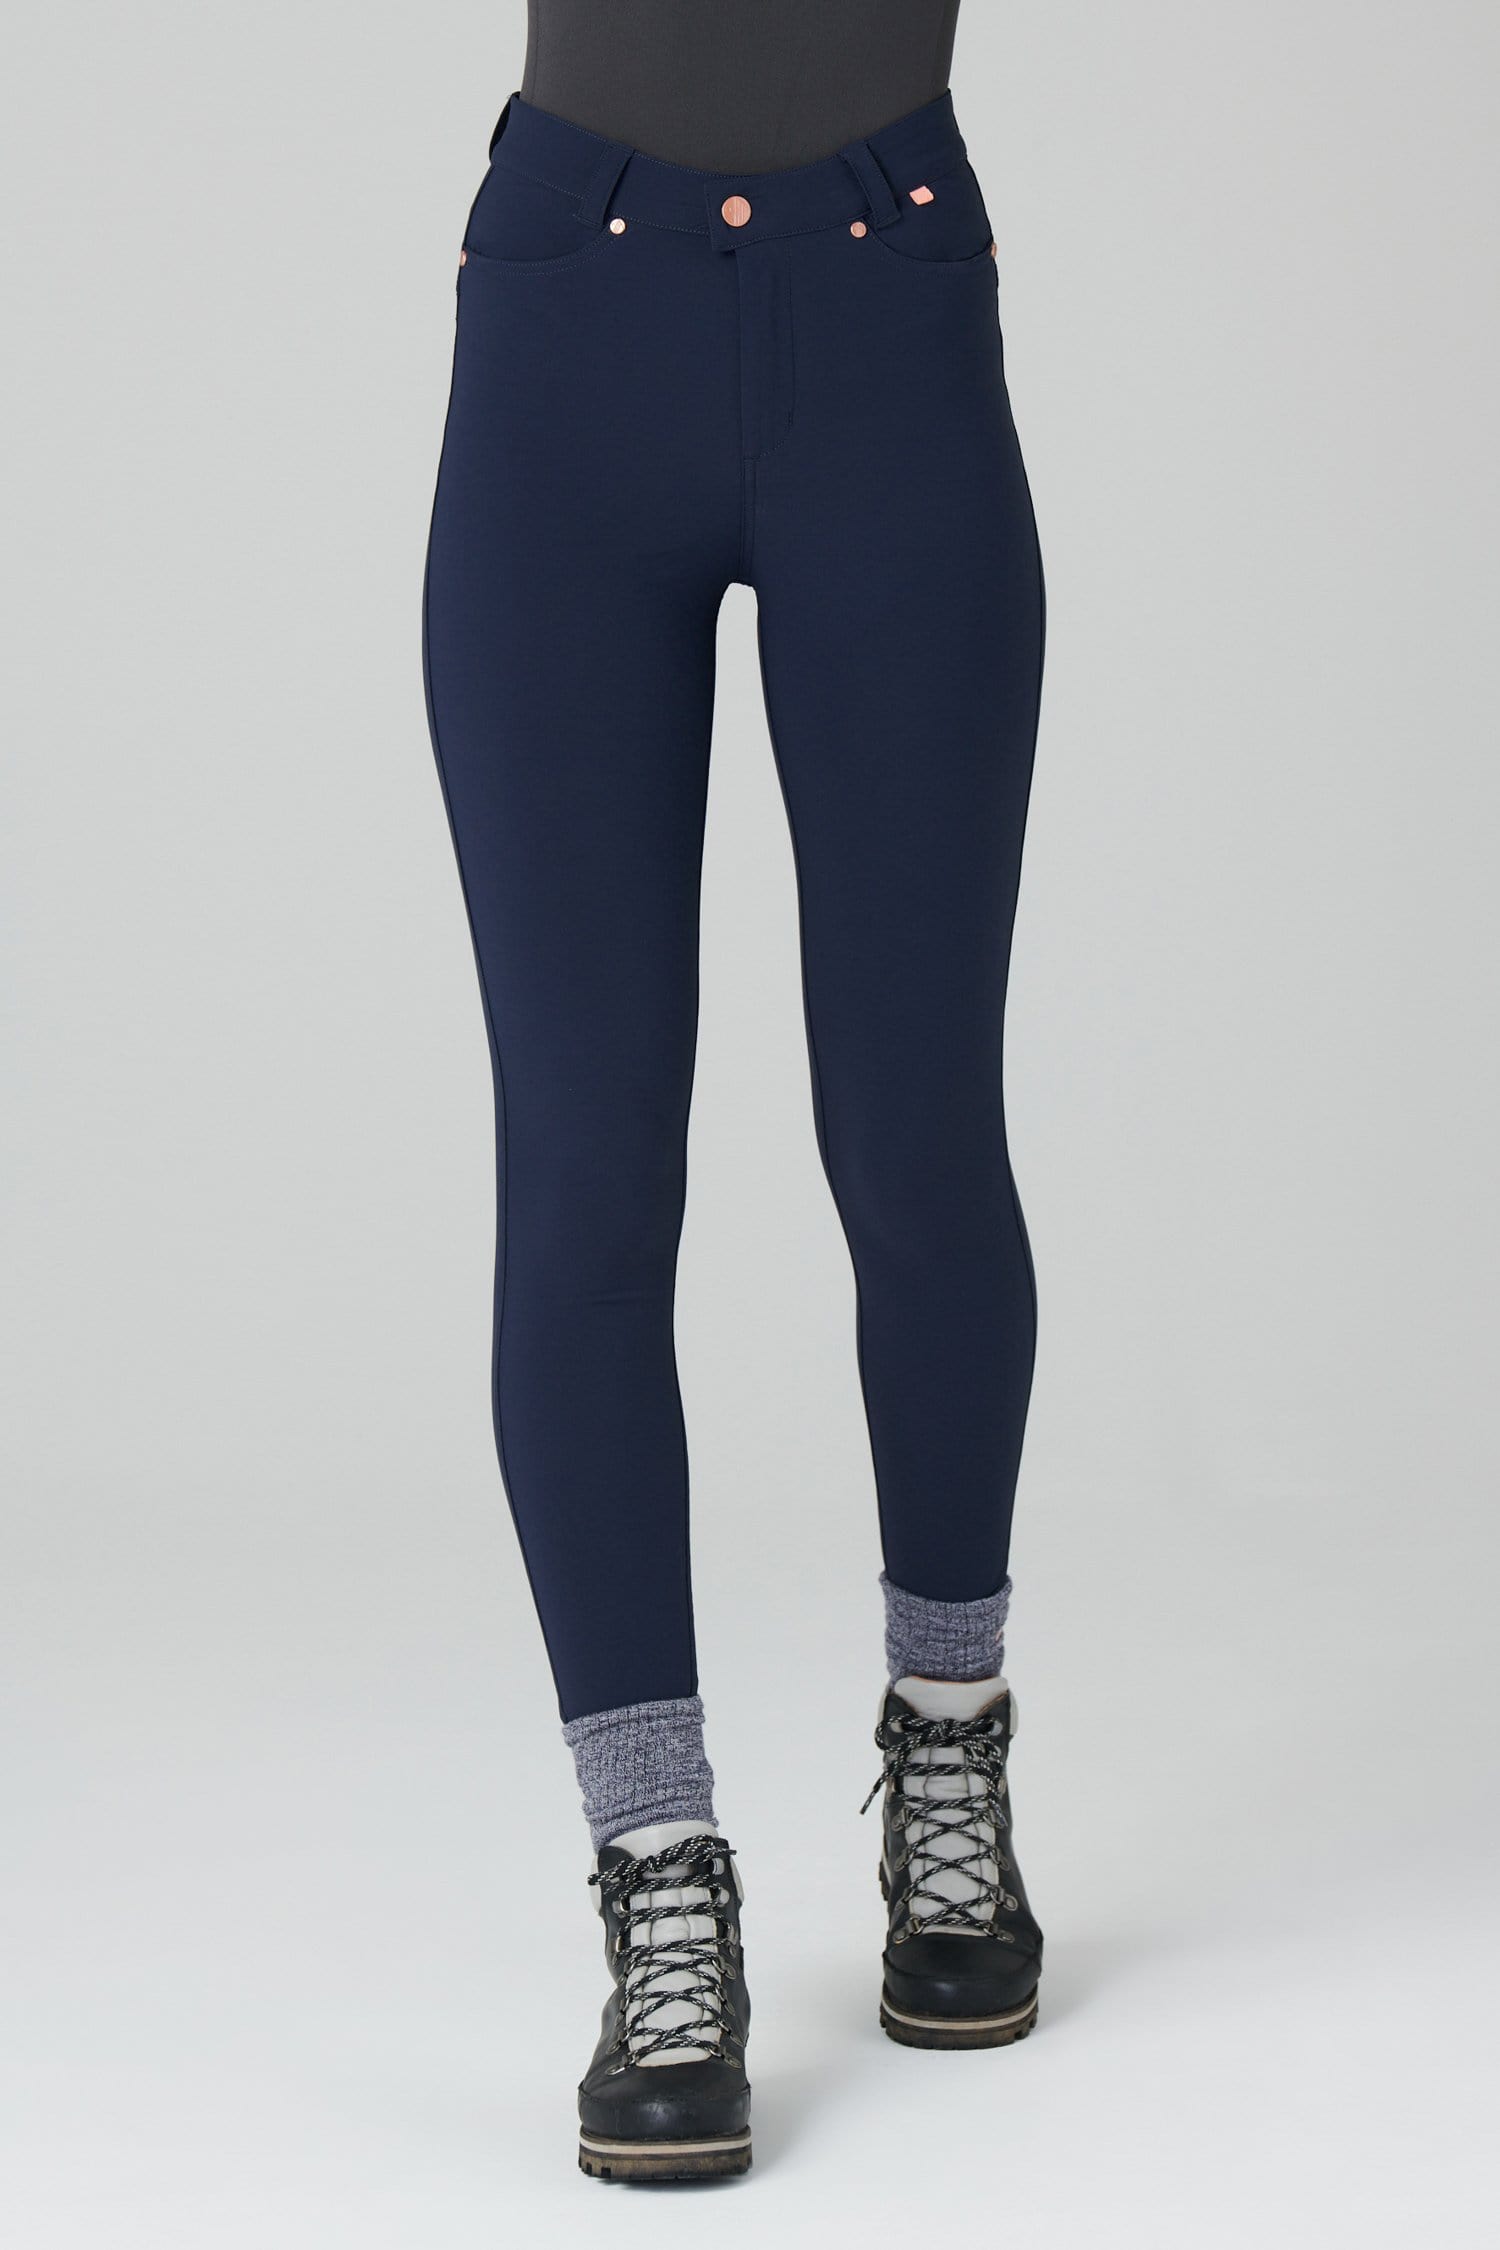 Max Stretch Skinny Outdoor Trousers - Deep Navy - 30l / Uk12 - Womens - Acai Outdoorwear